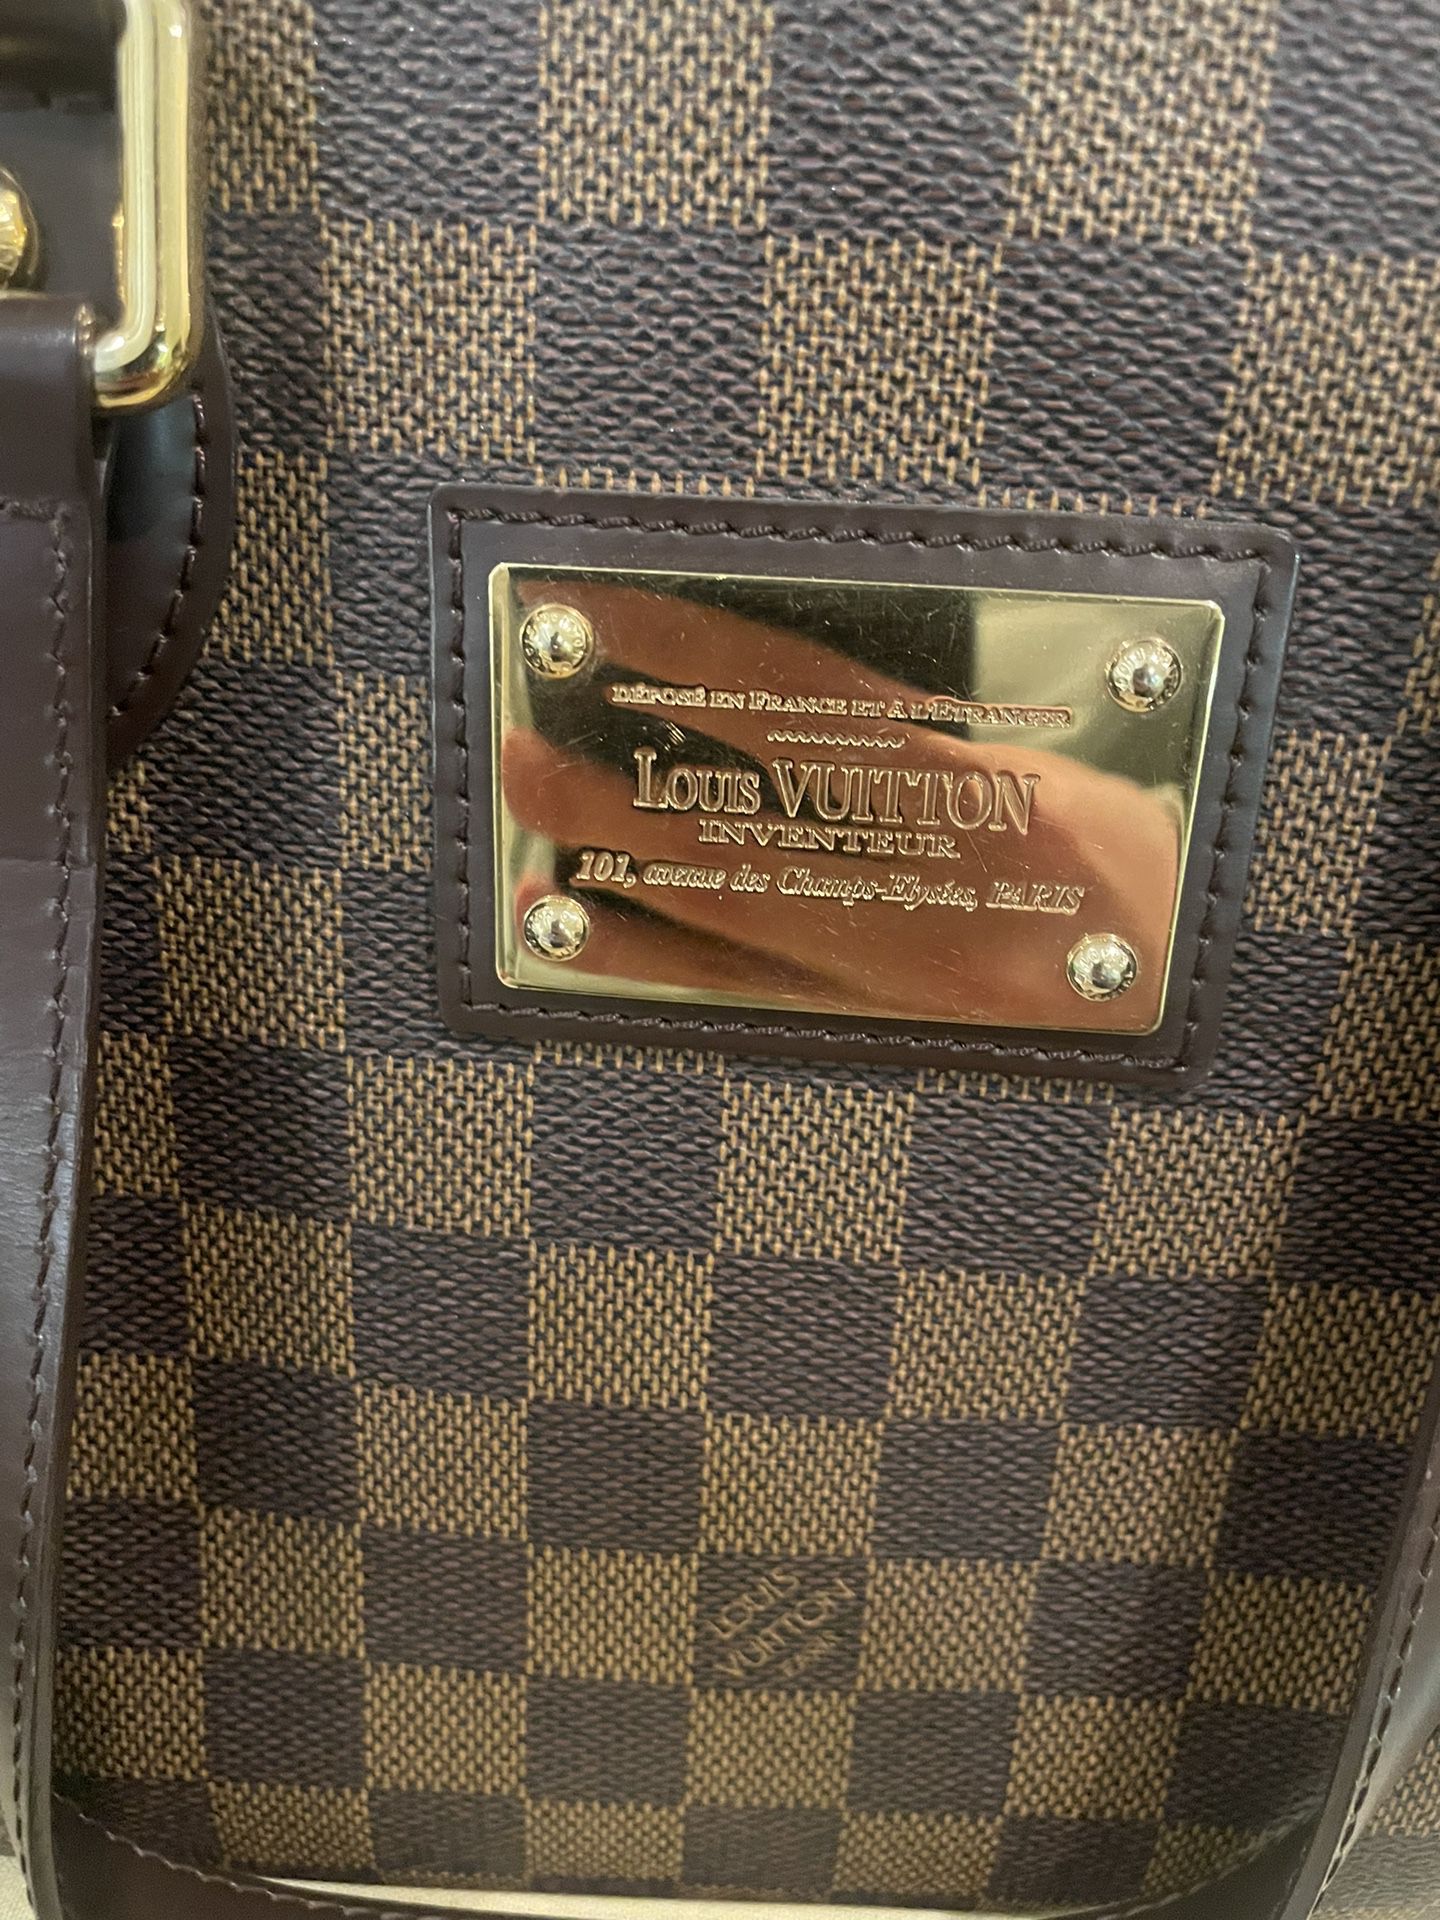 Pre-loved Authentic LOUIS VUITTON Hampstead MM Black checkerboard